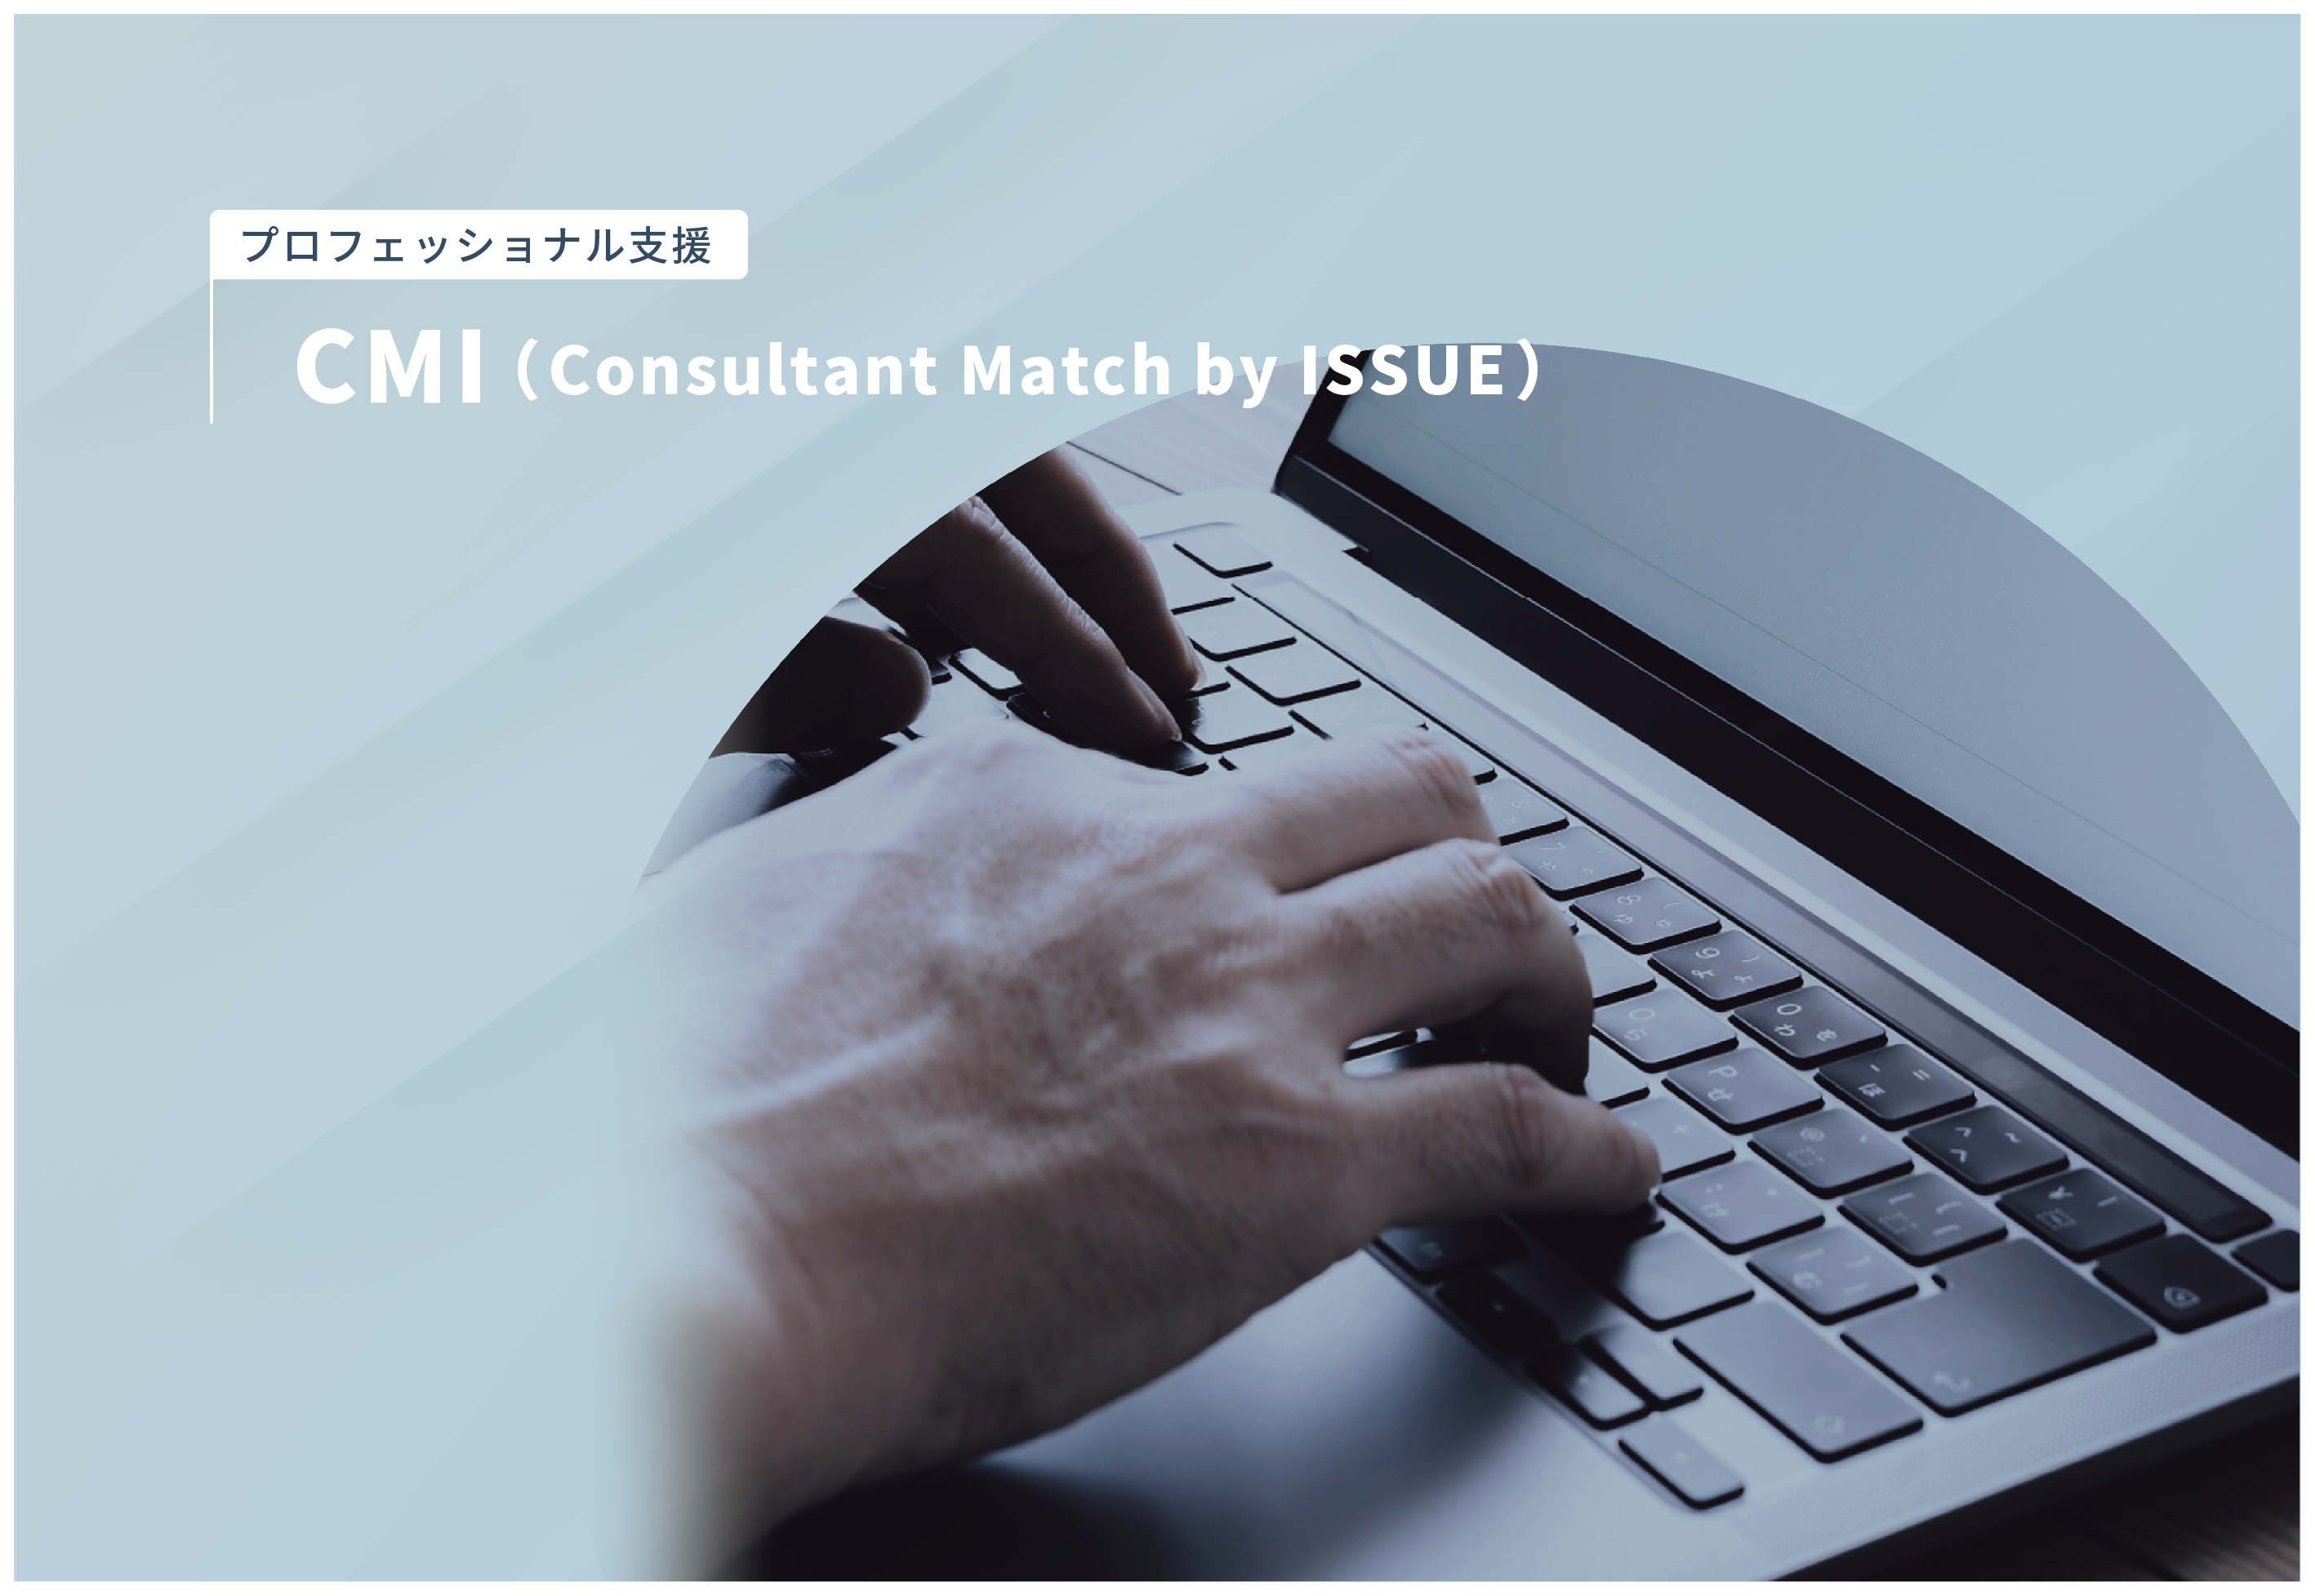 CMI（Consultant Match by ISSUE）